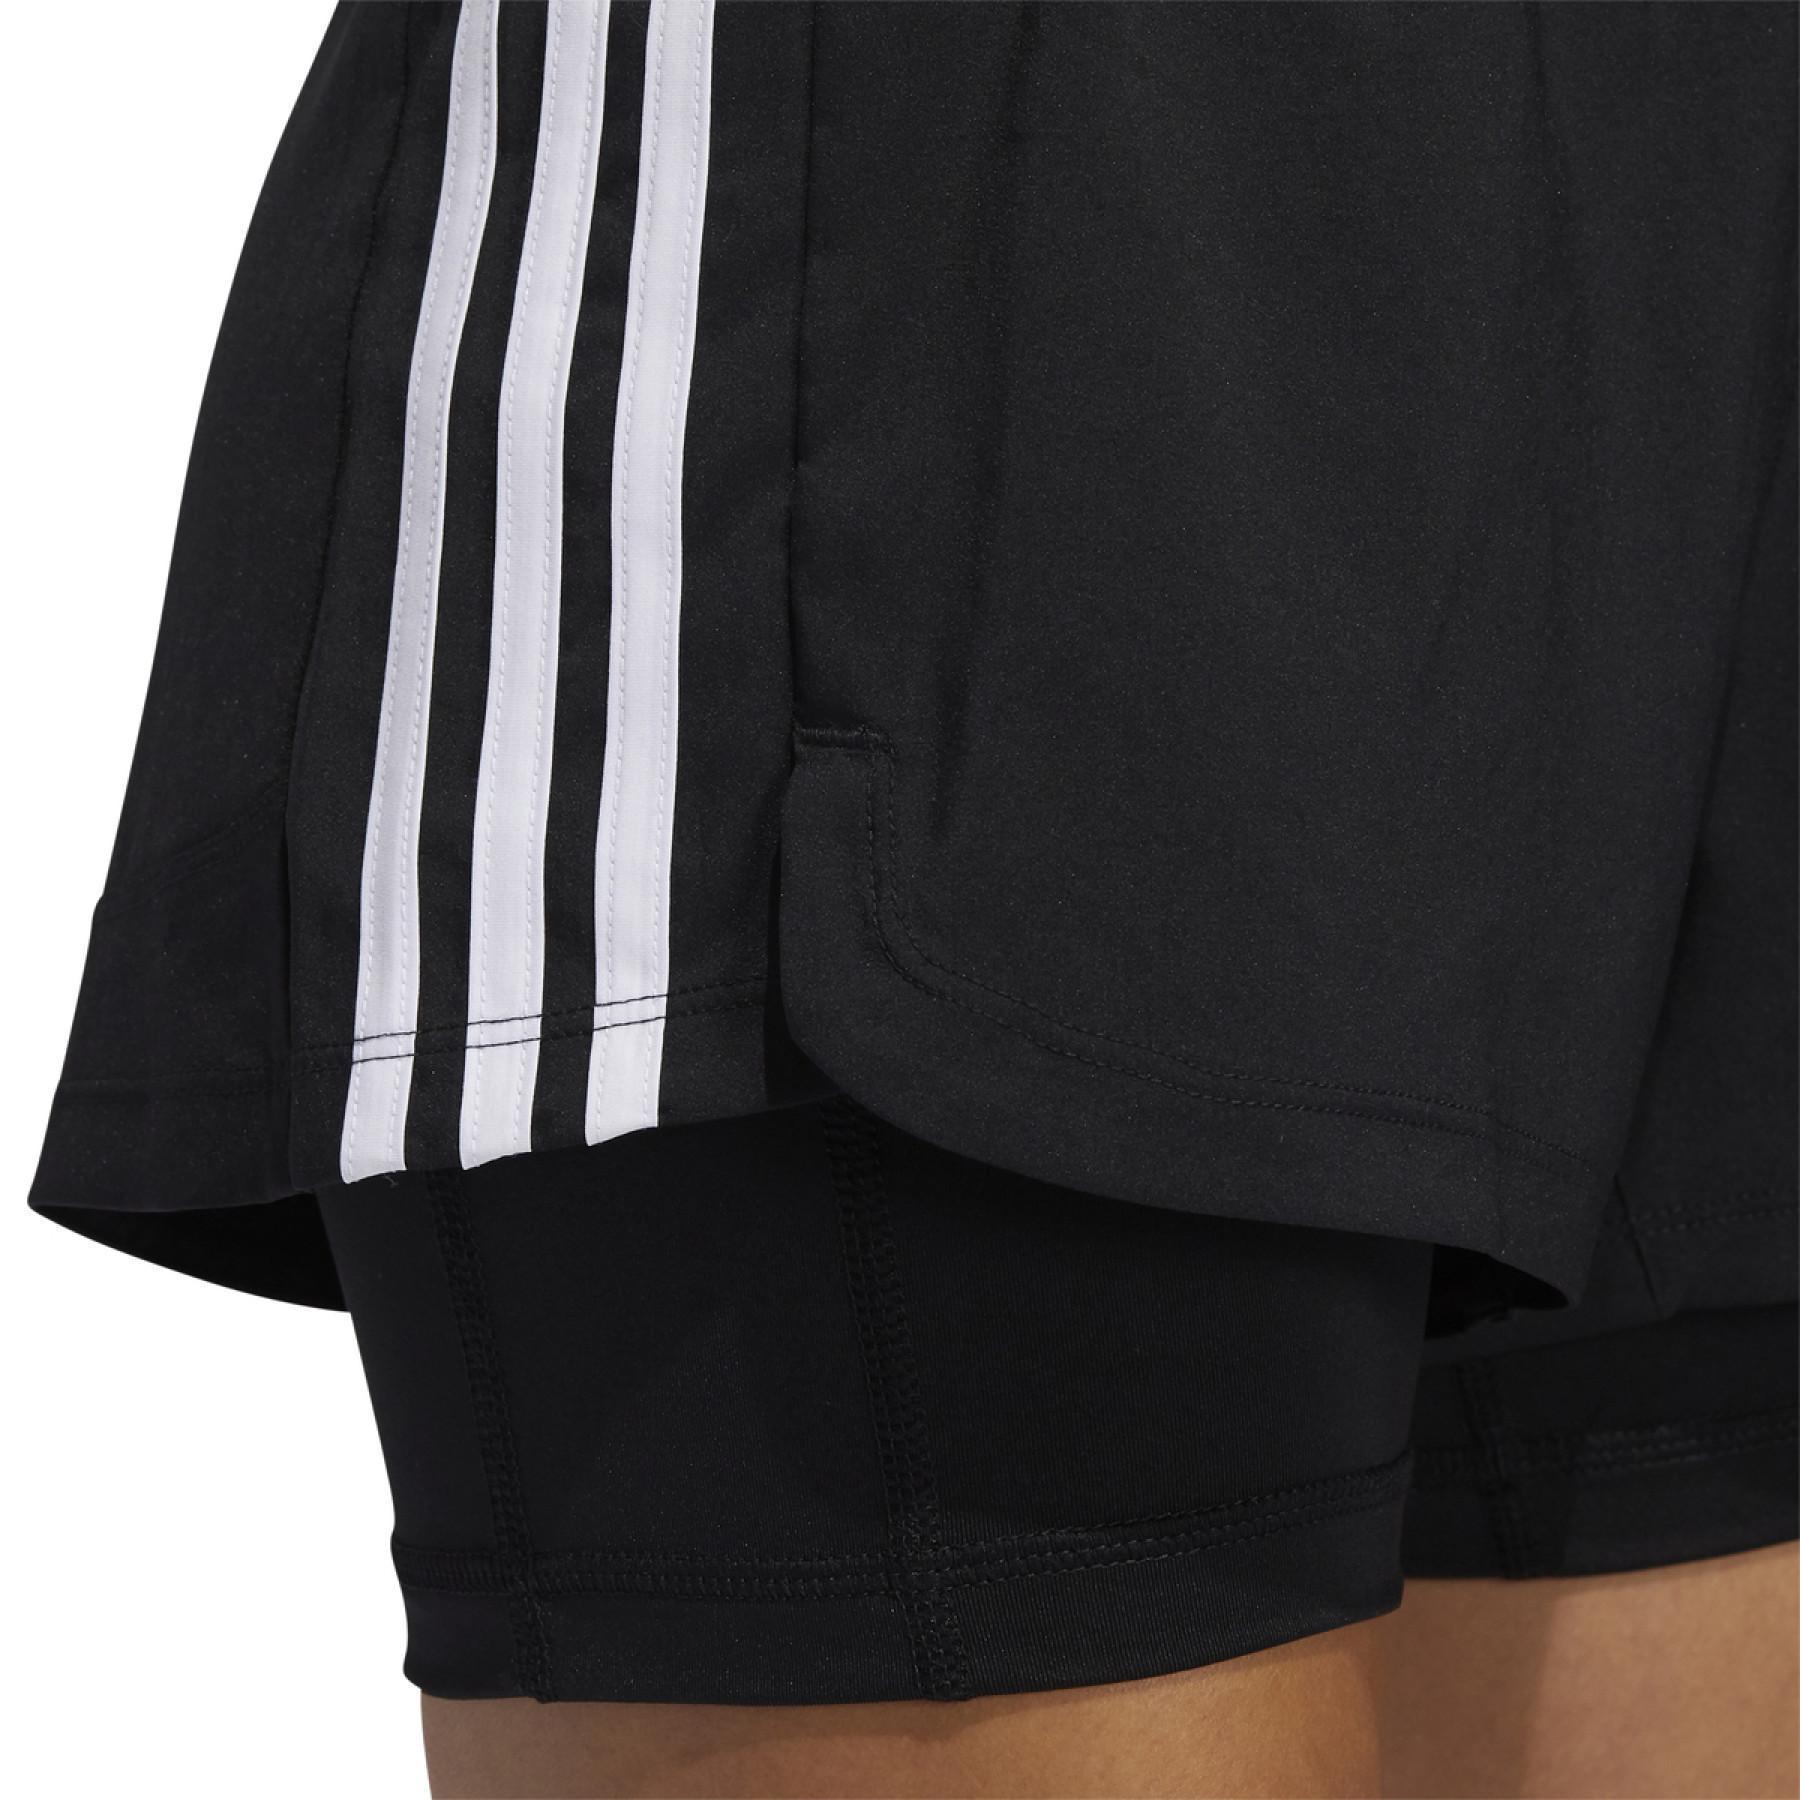 Calções mulher adidas Pacer 3-tiras Woven Two-in-One